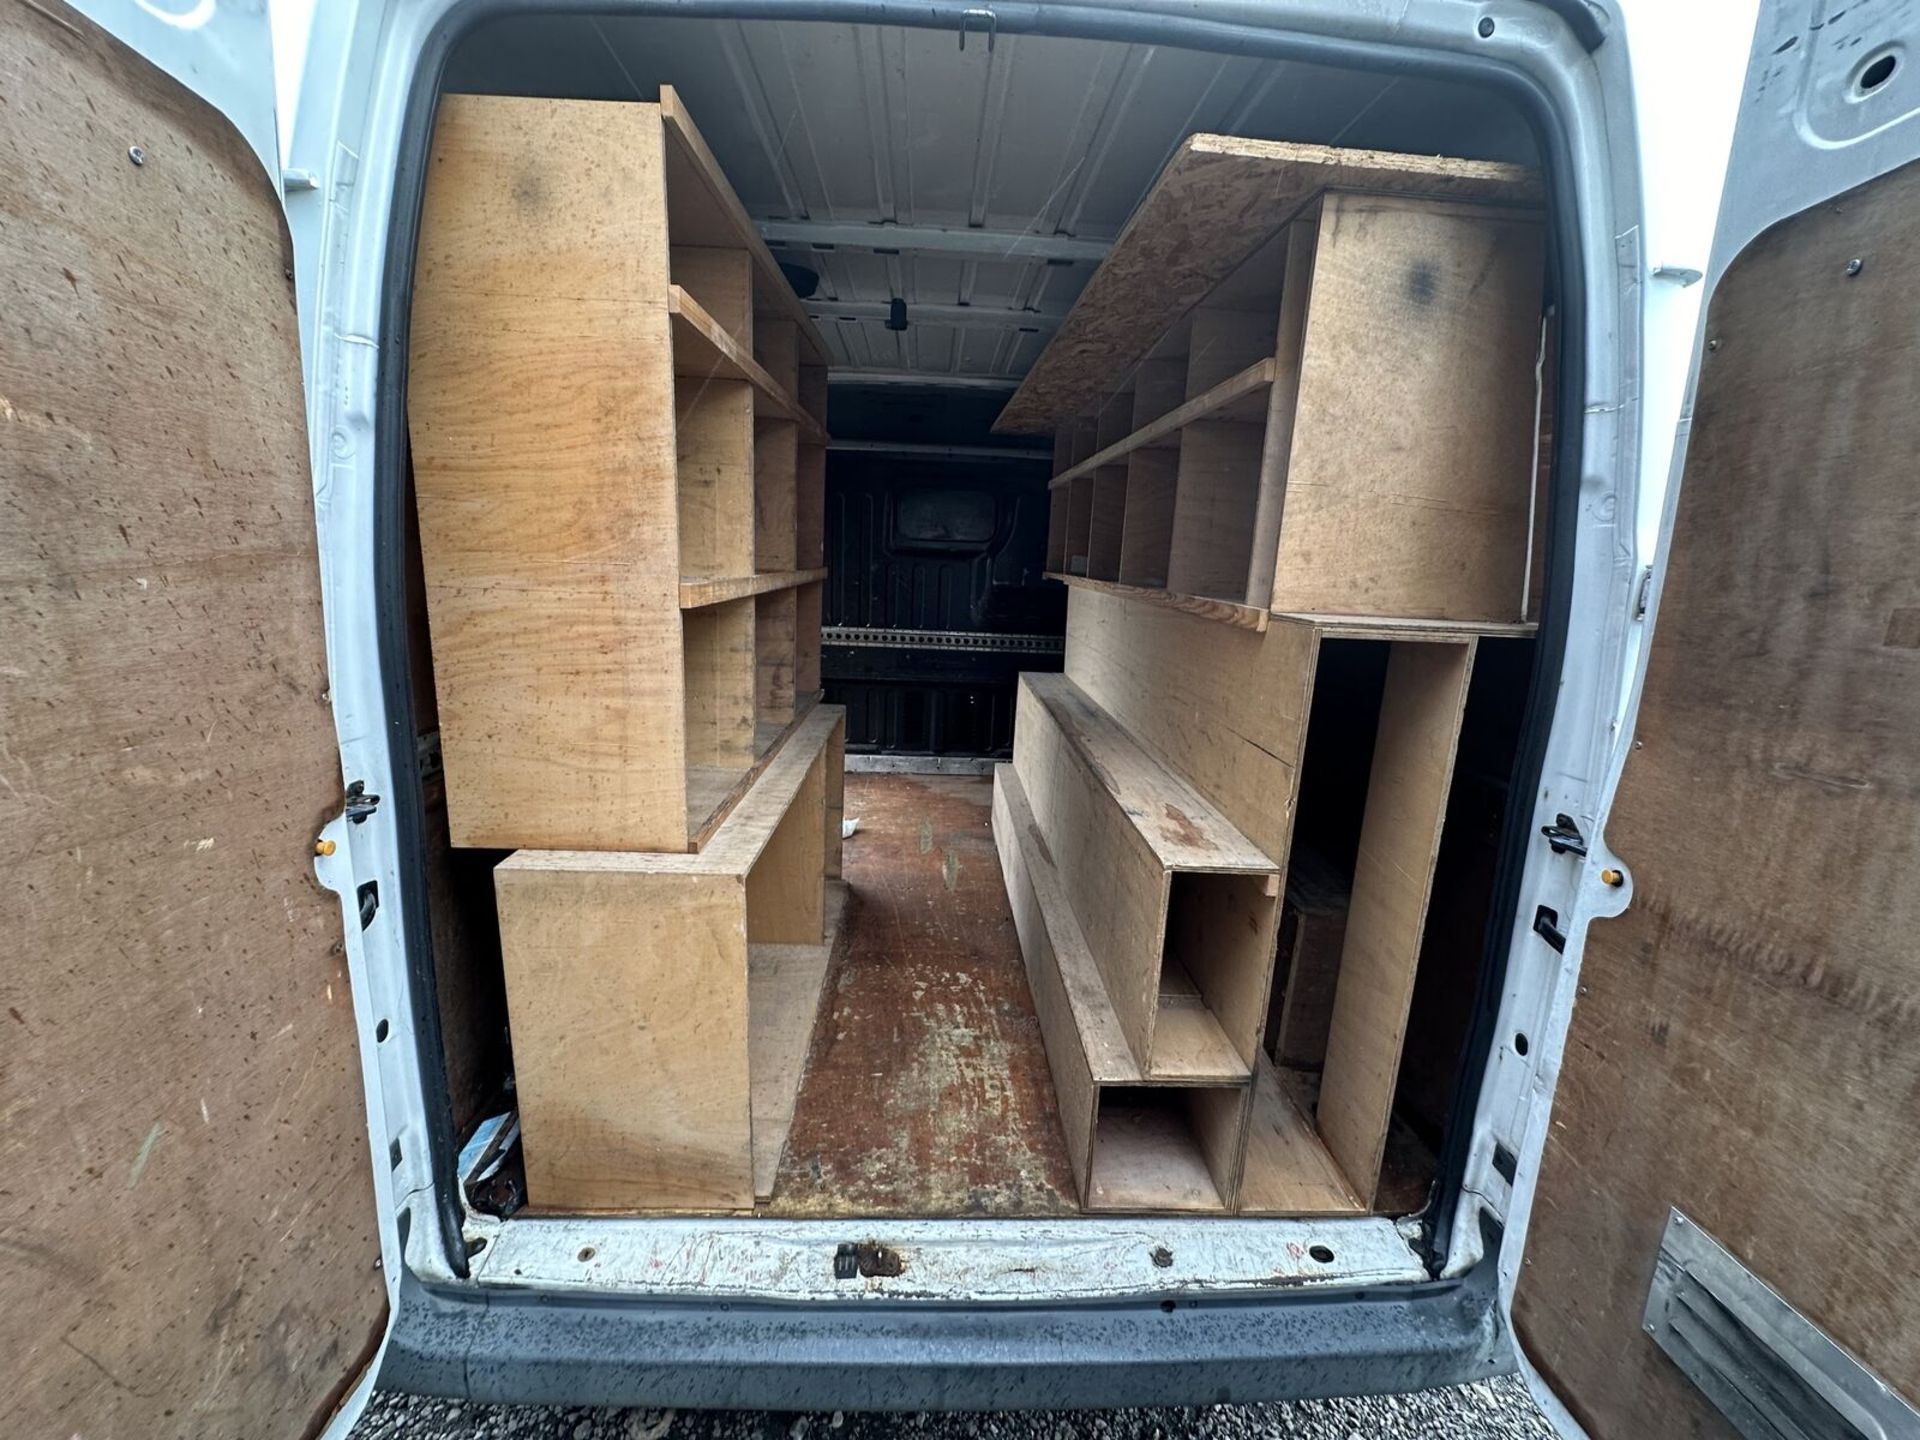 RELIABLE WORKHORSE: 60 PLATE FORD TRANSIT 260, MEDIUM ROOF, READY TO TACKLE TASKS - Image 5 of 9